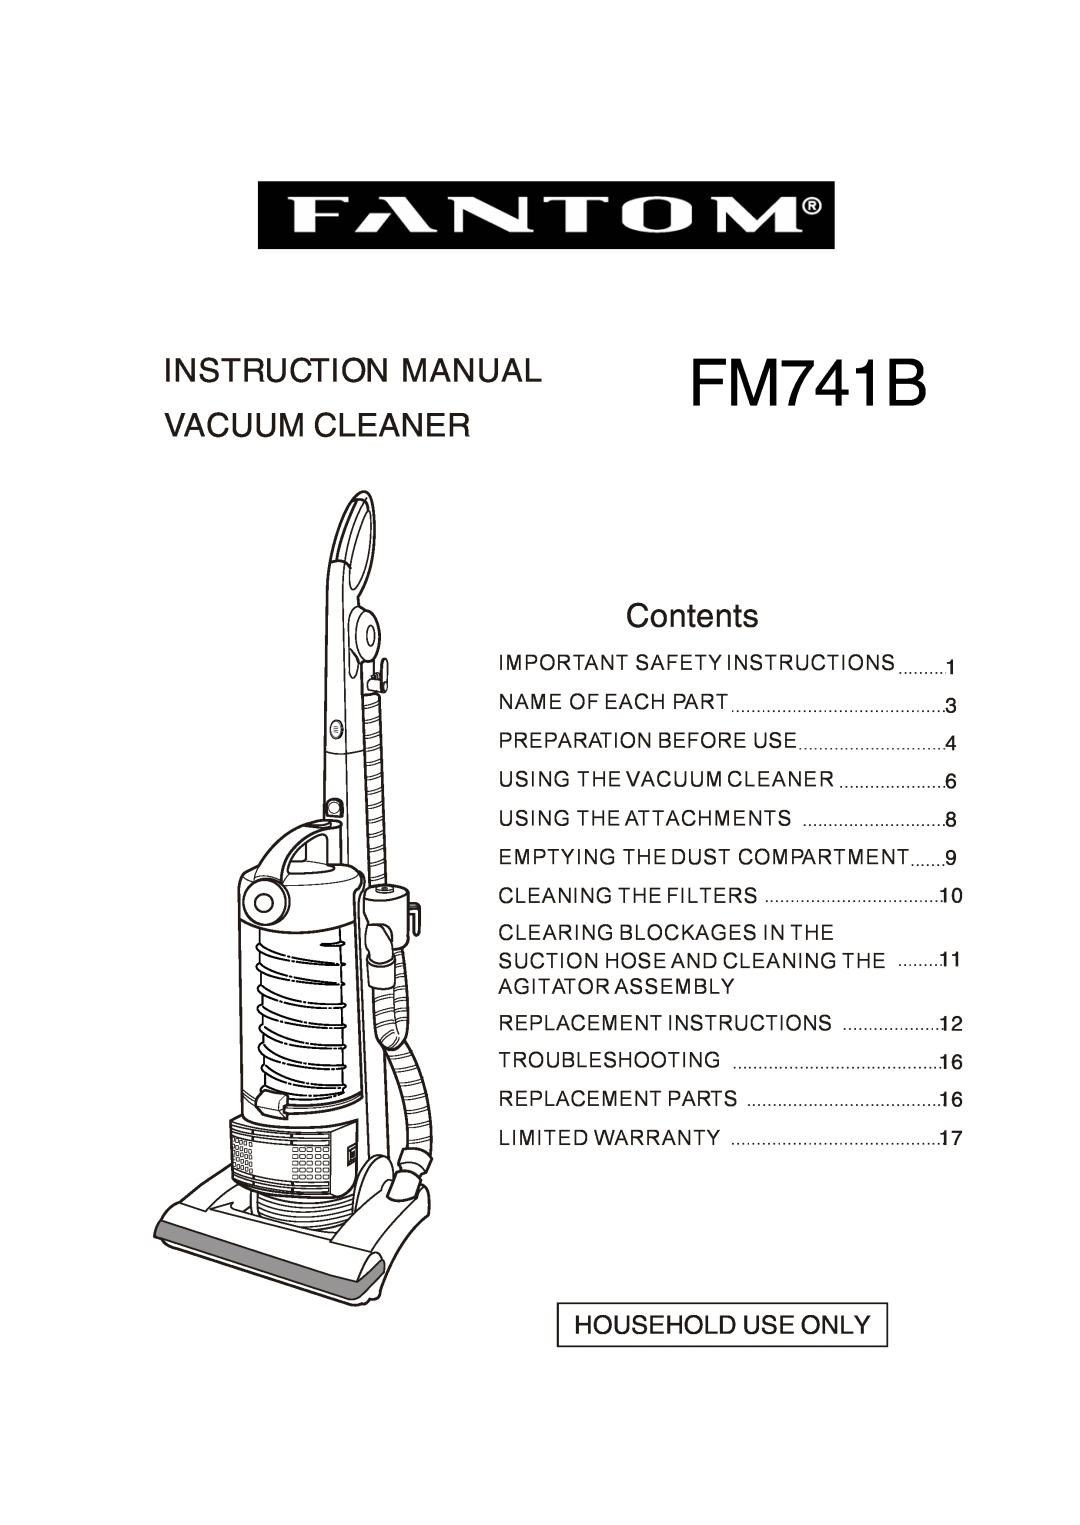 Fantom Vacuum FM741B instruction manual Vacuum Cleaner, Contents, Household Use Only, 1 3 4 